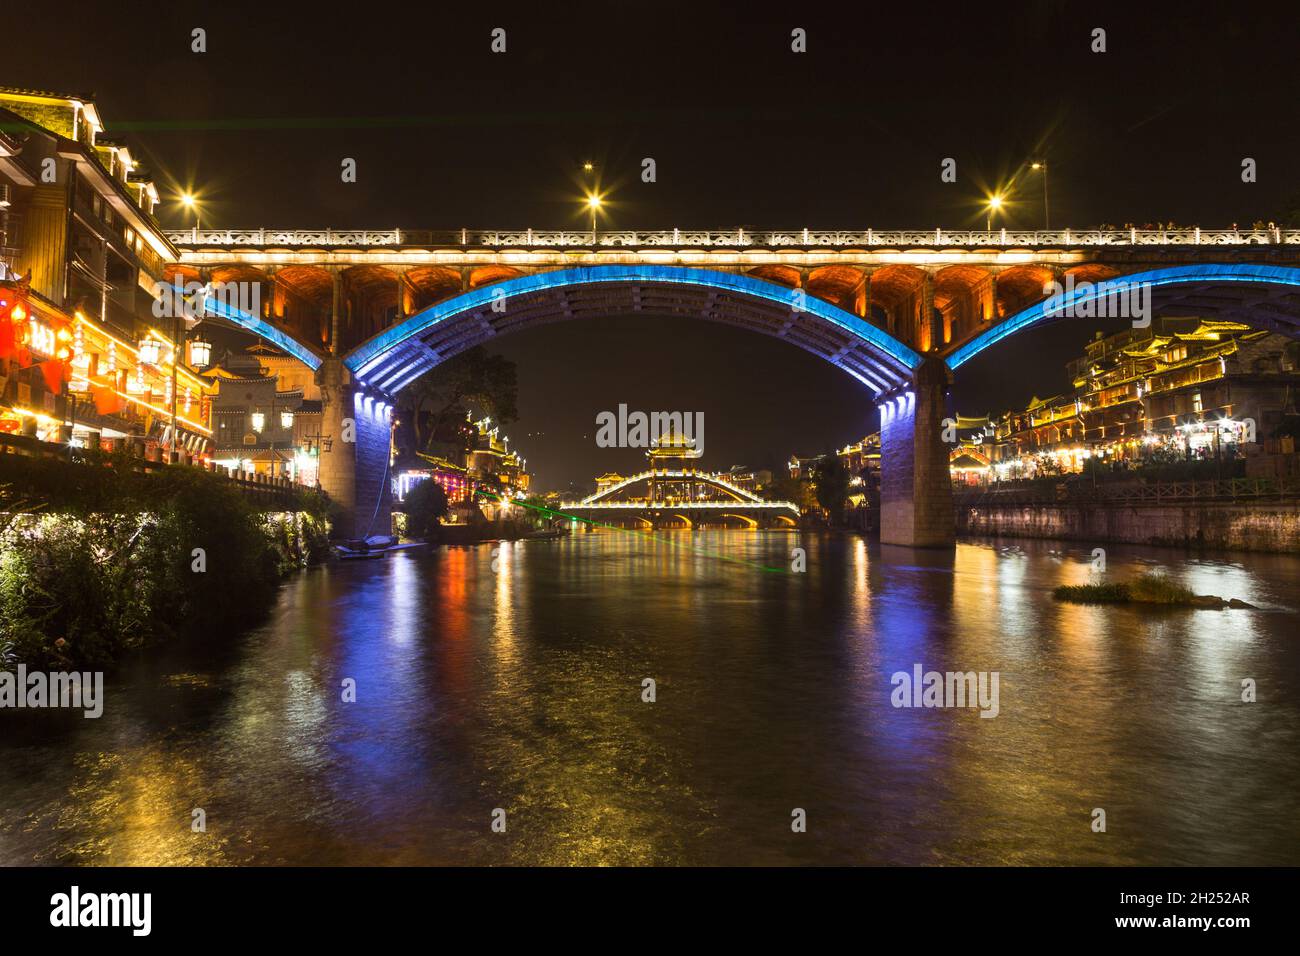 The hIghway bridge frames the Fenghuang Bridge lit up at night in Fenghuang, China. Stock Photo